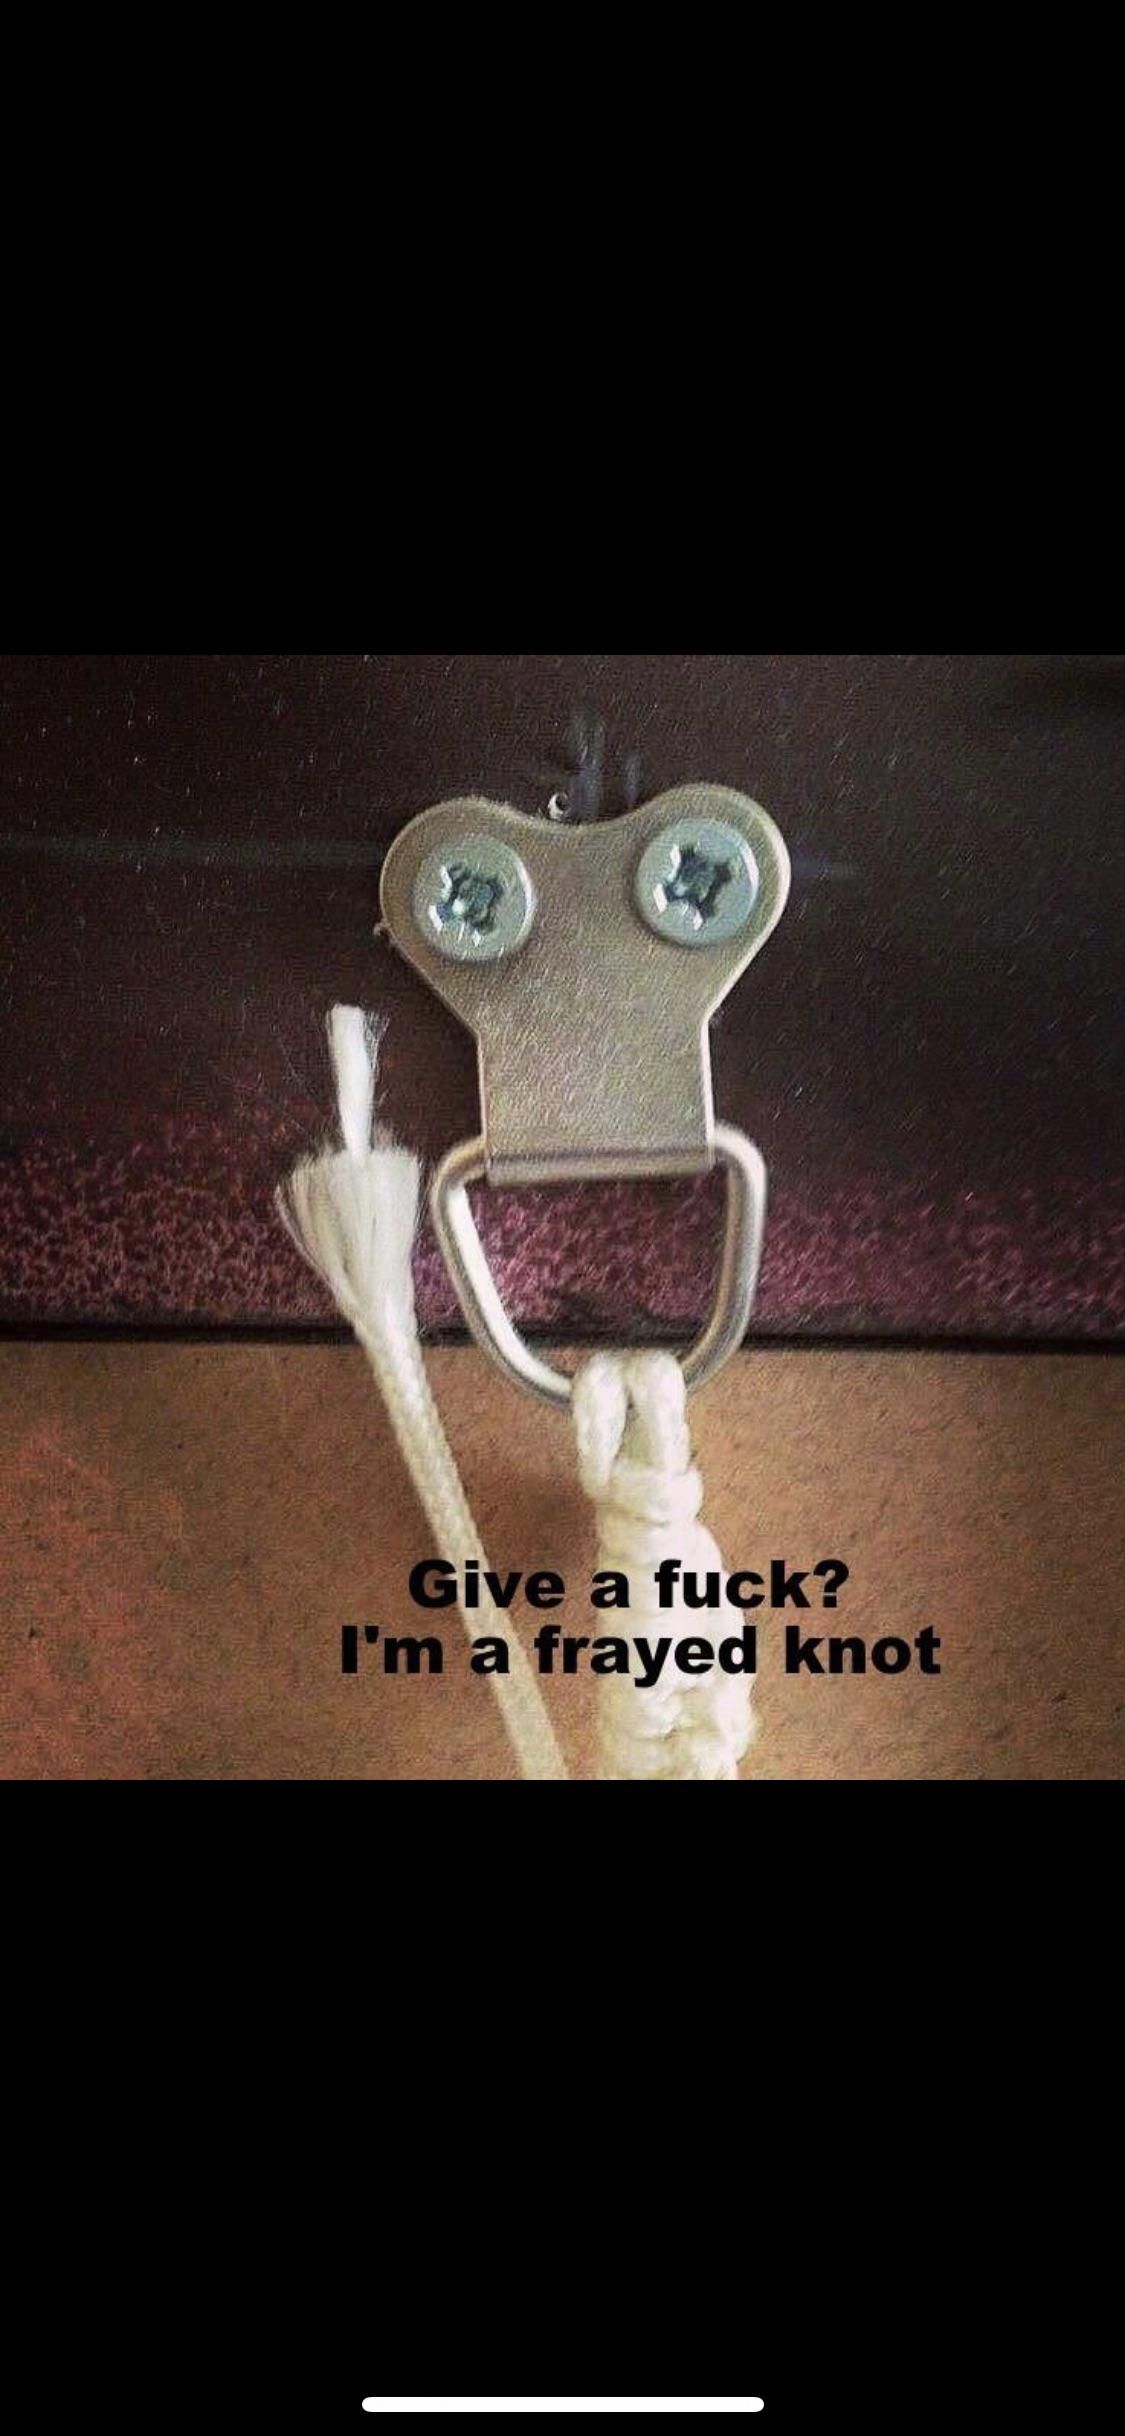 This is knot funny!